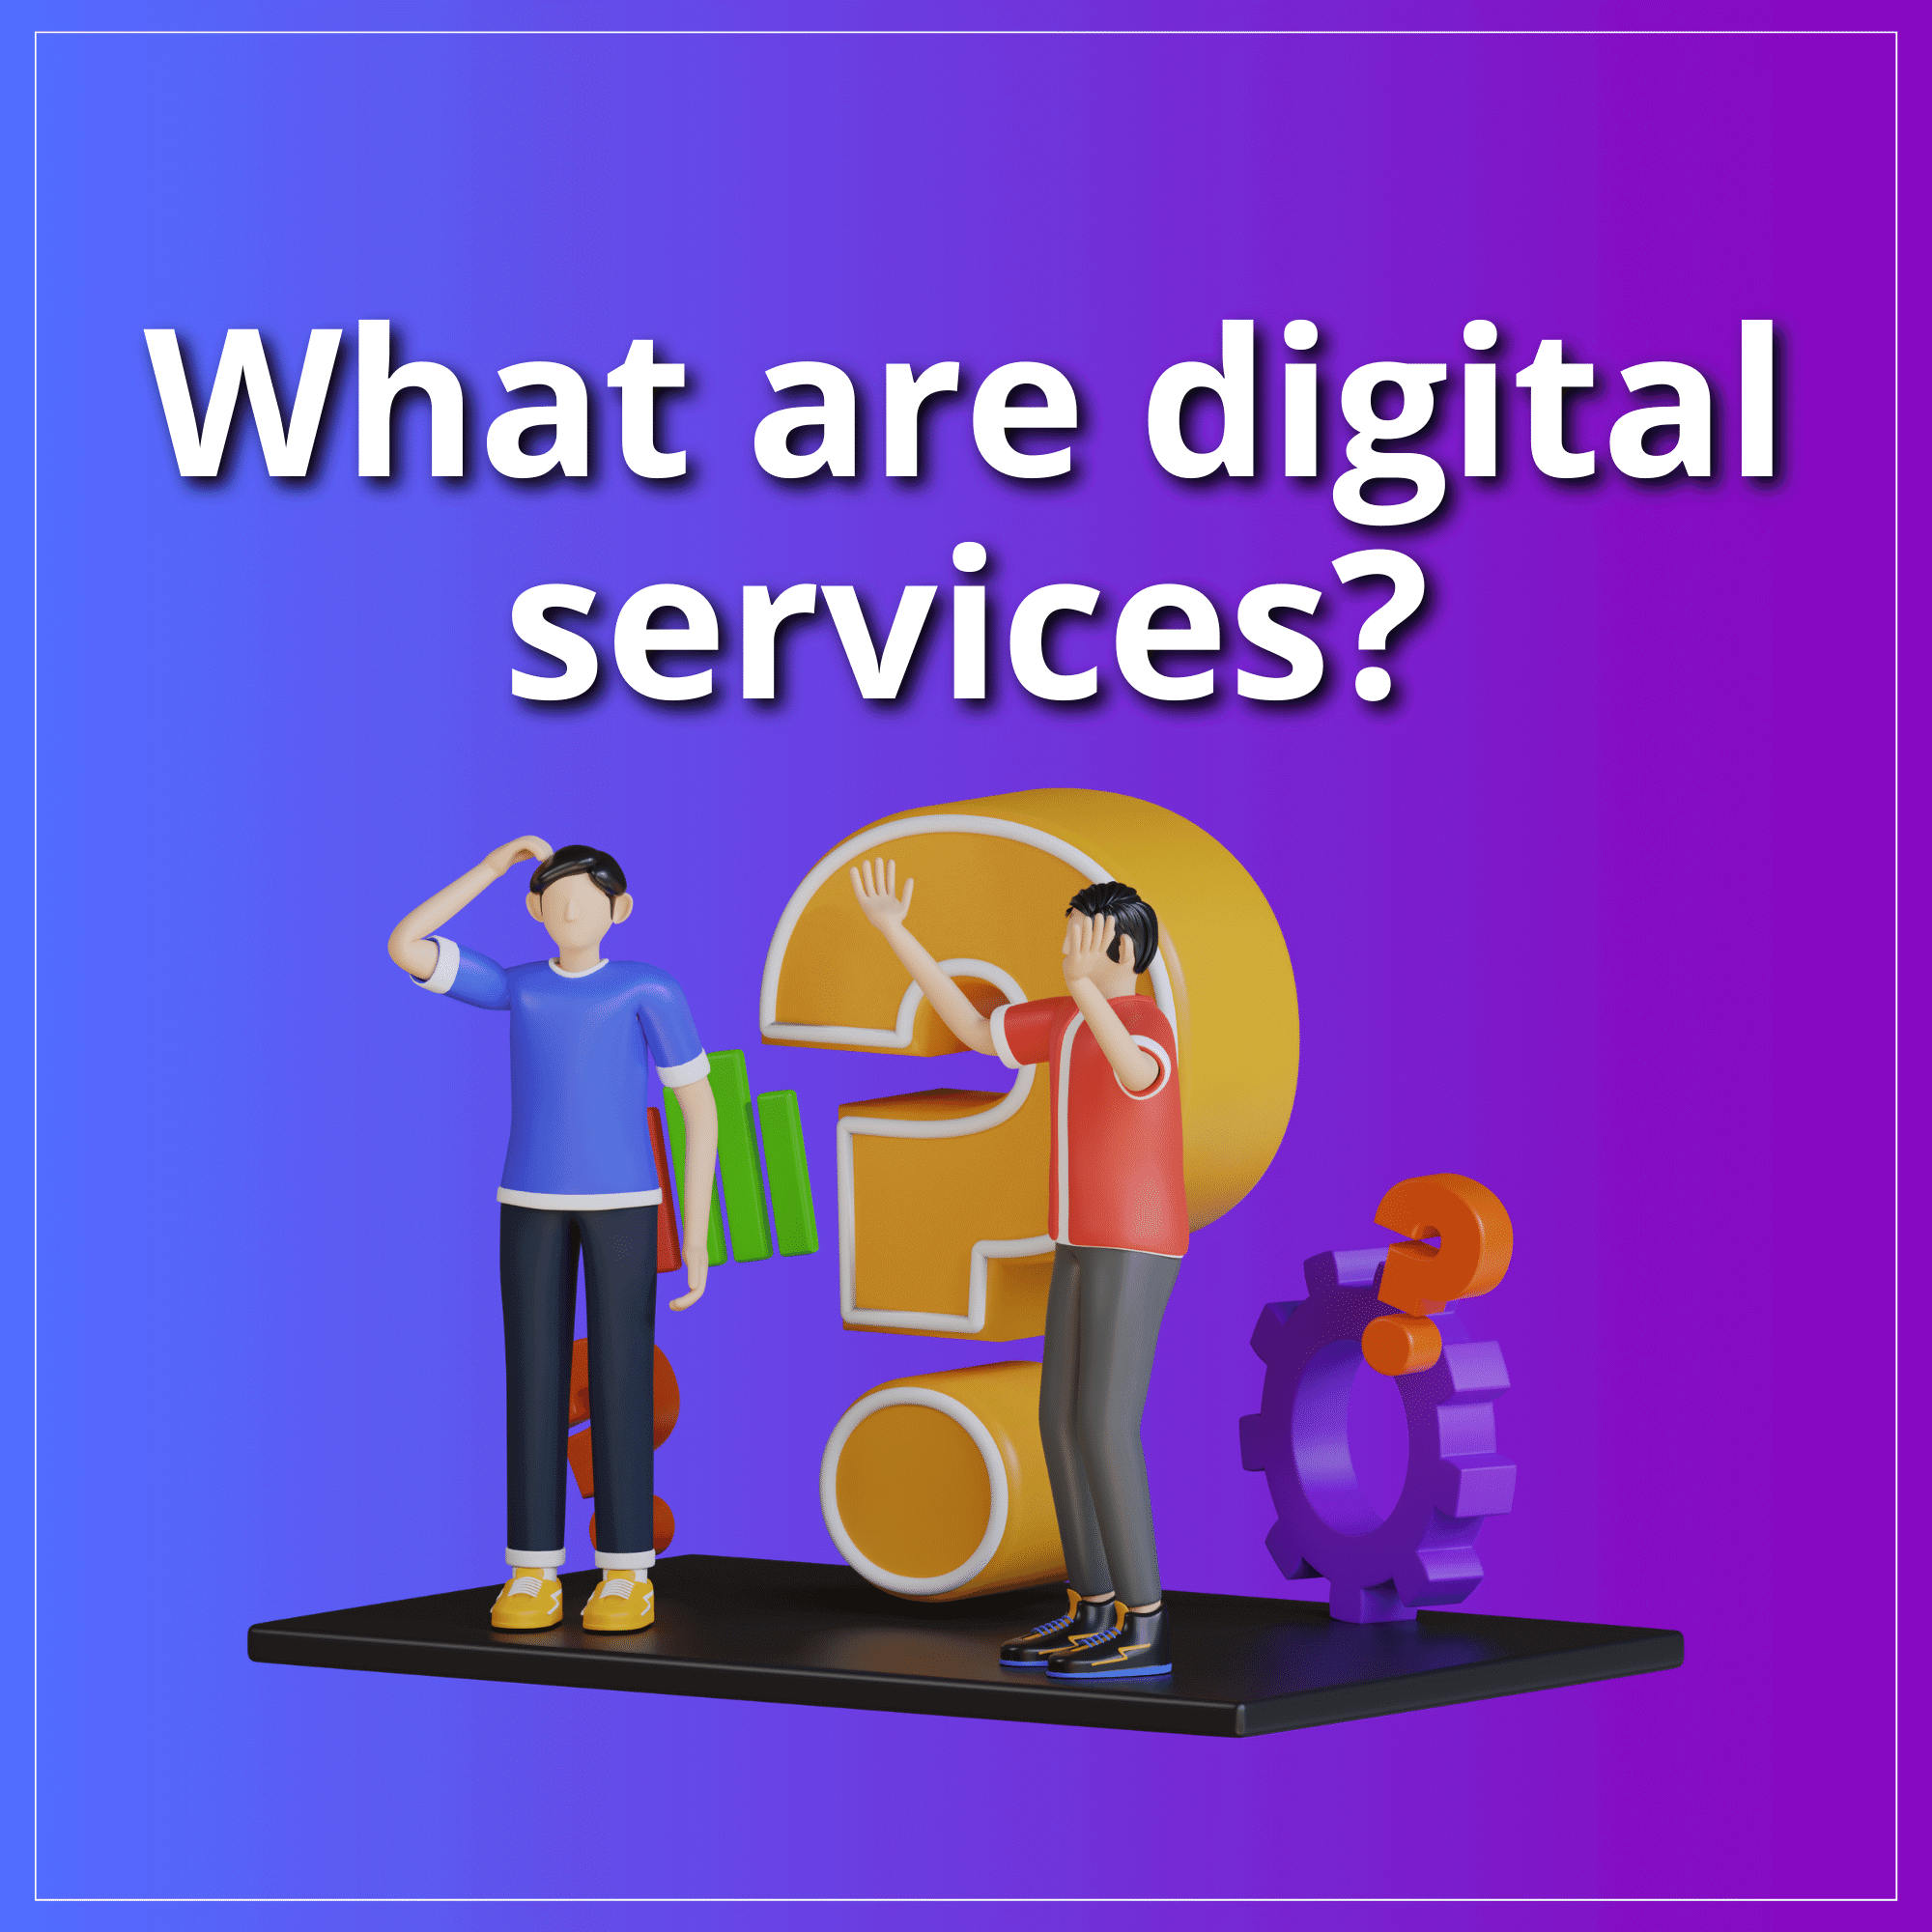 What are digital services